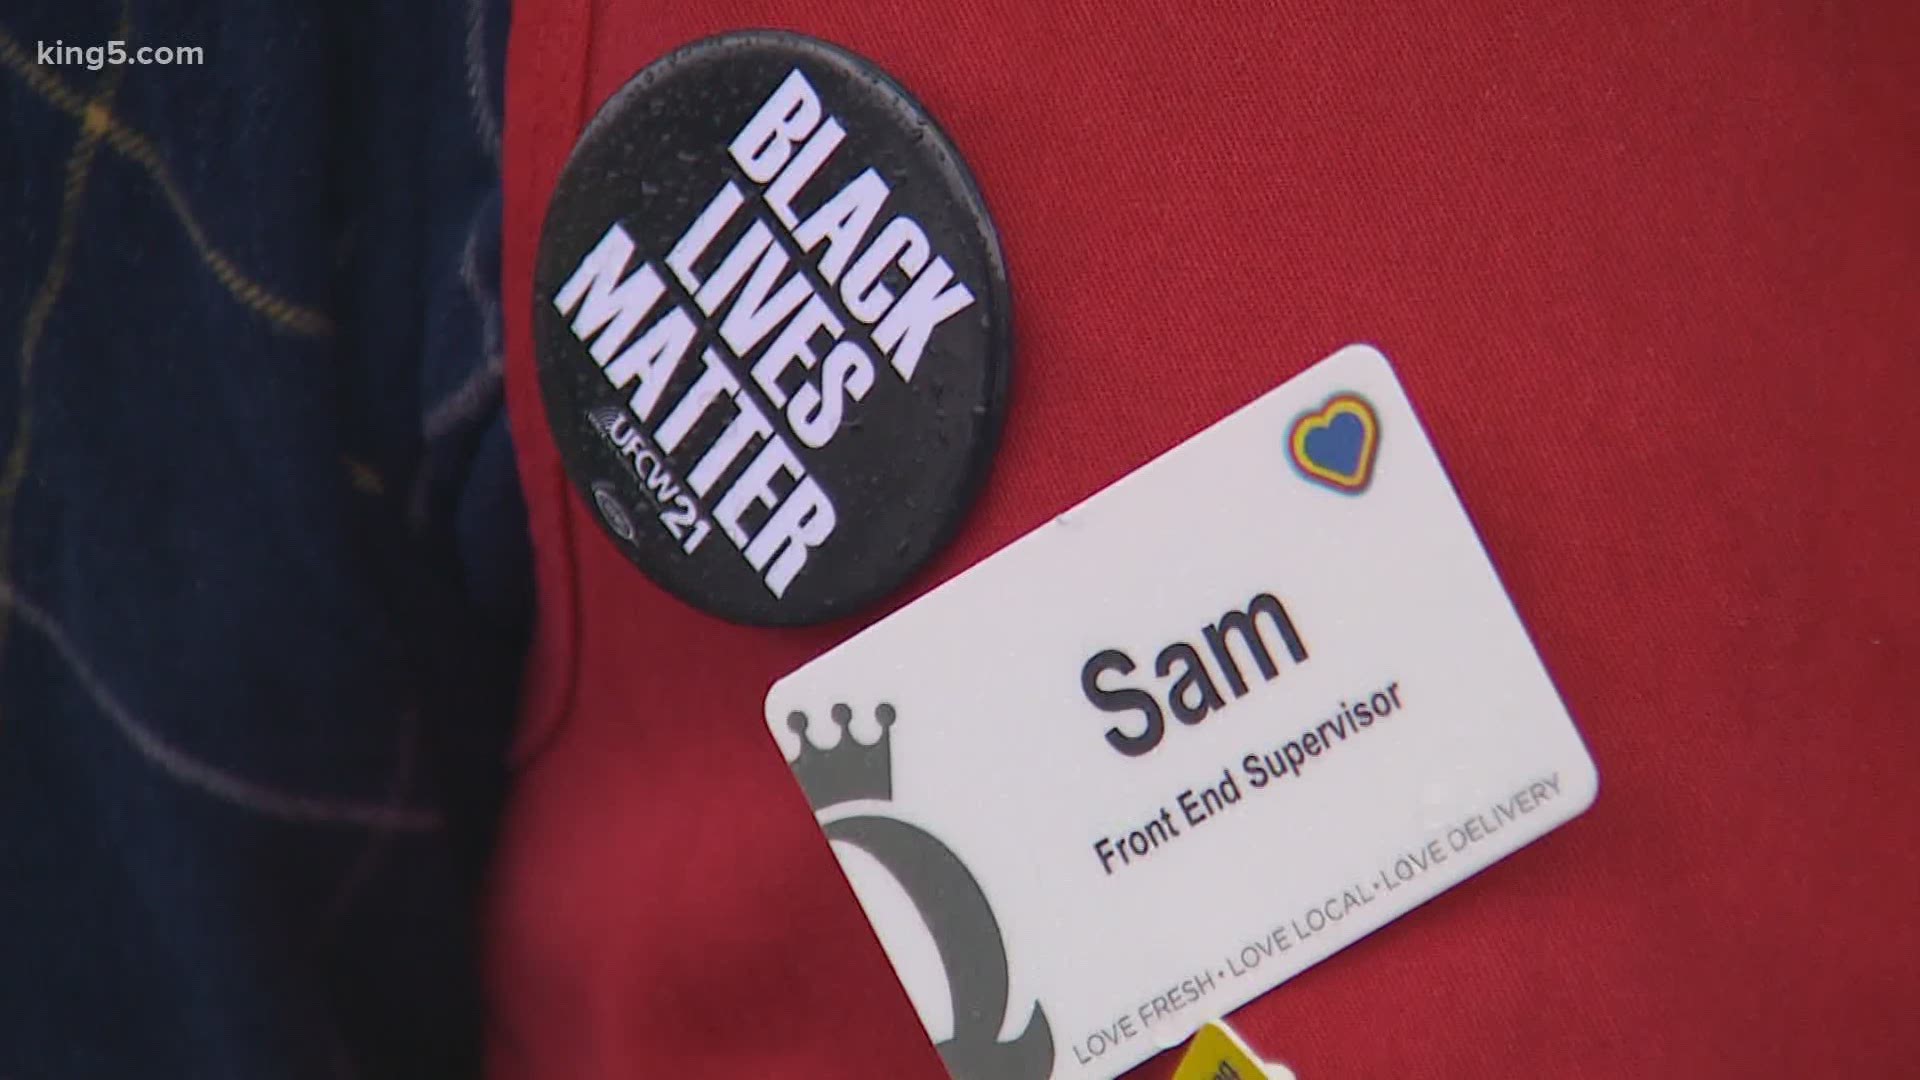 Employees at QFC and Fred Meyer stores are saying a ban on “Black Lives Matter” buttons violates federal labor law and their union contract.